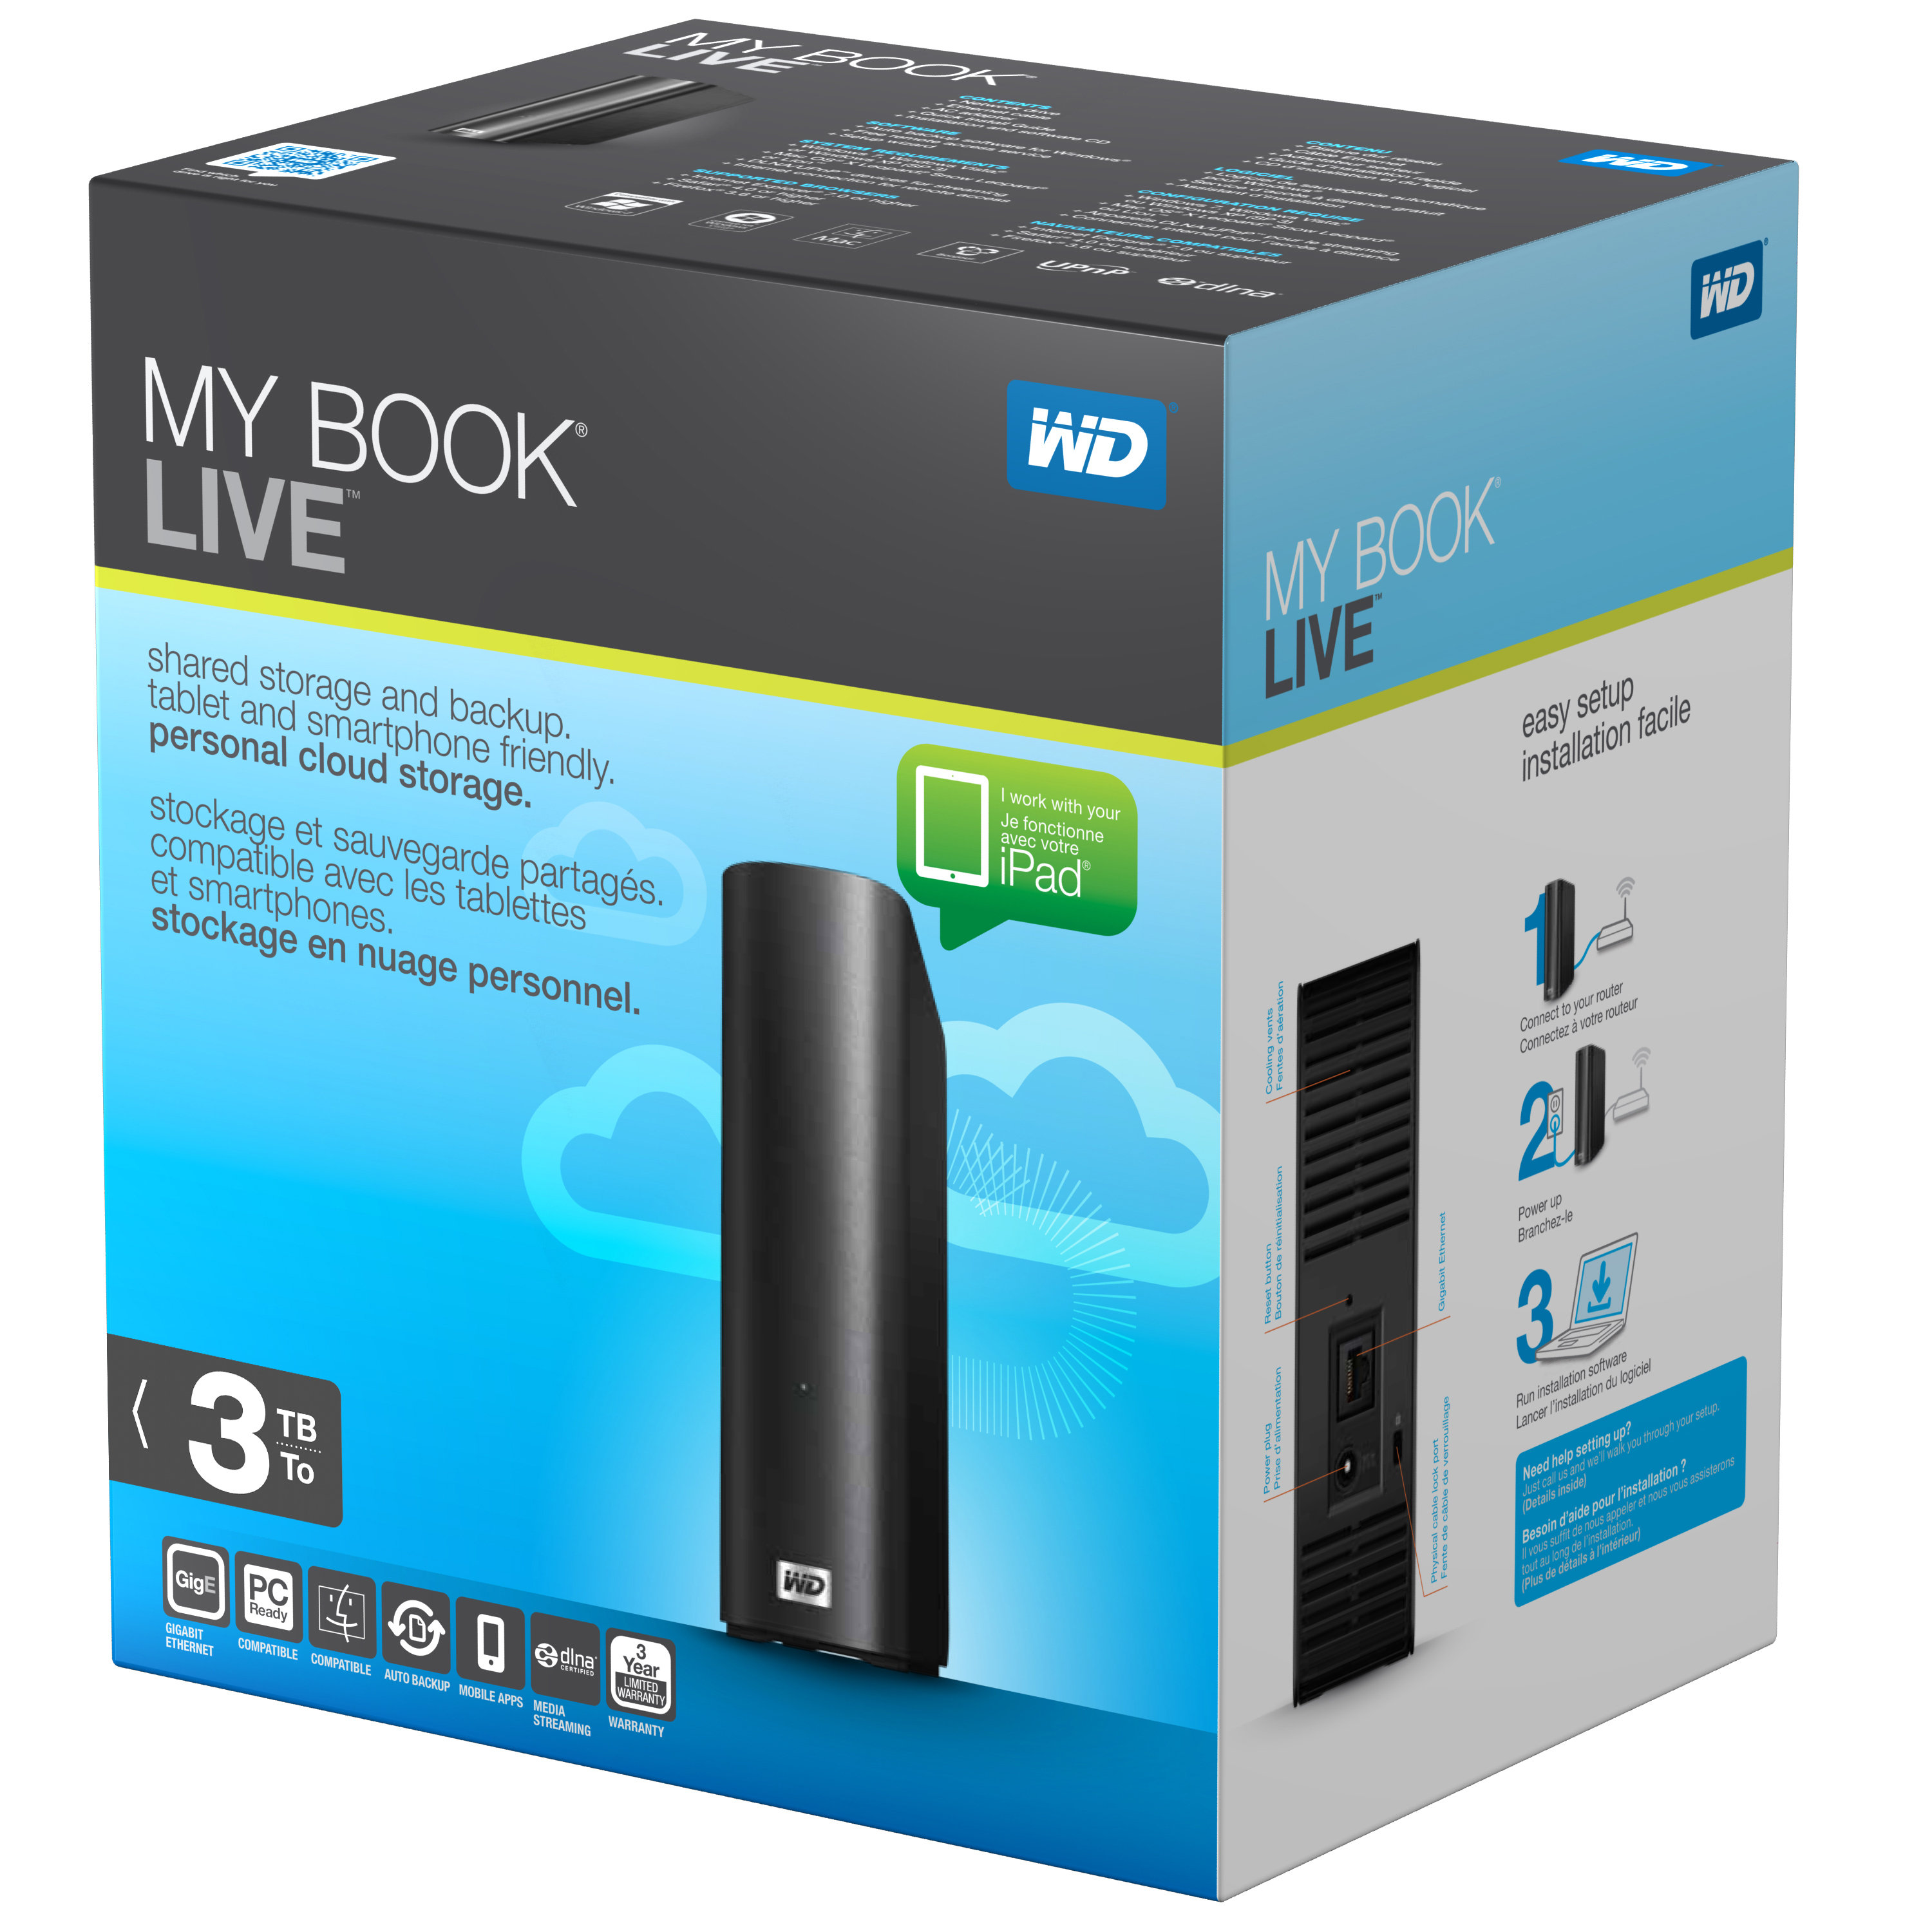 WD 3TB My Book USB 3.0 External Hard Drive Norman price S$ 219  Selling at $100, Mobile Phones  Gadgets, Mobile  Gadget Accessories,  Other Mobile  Gadget Accessories on Carousell